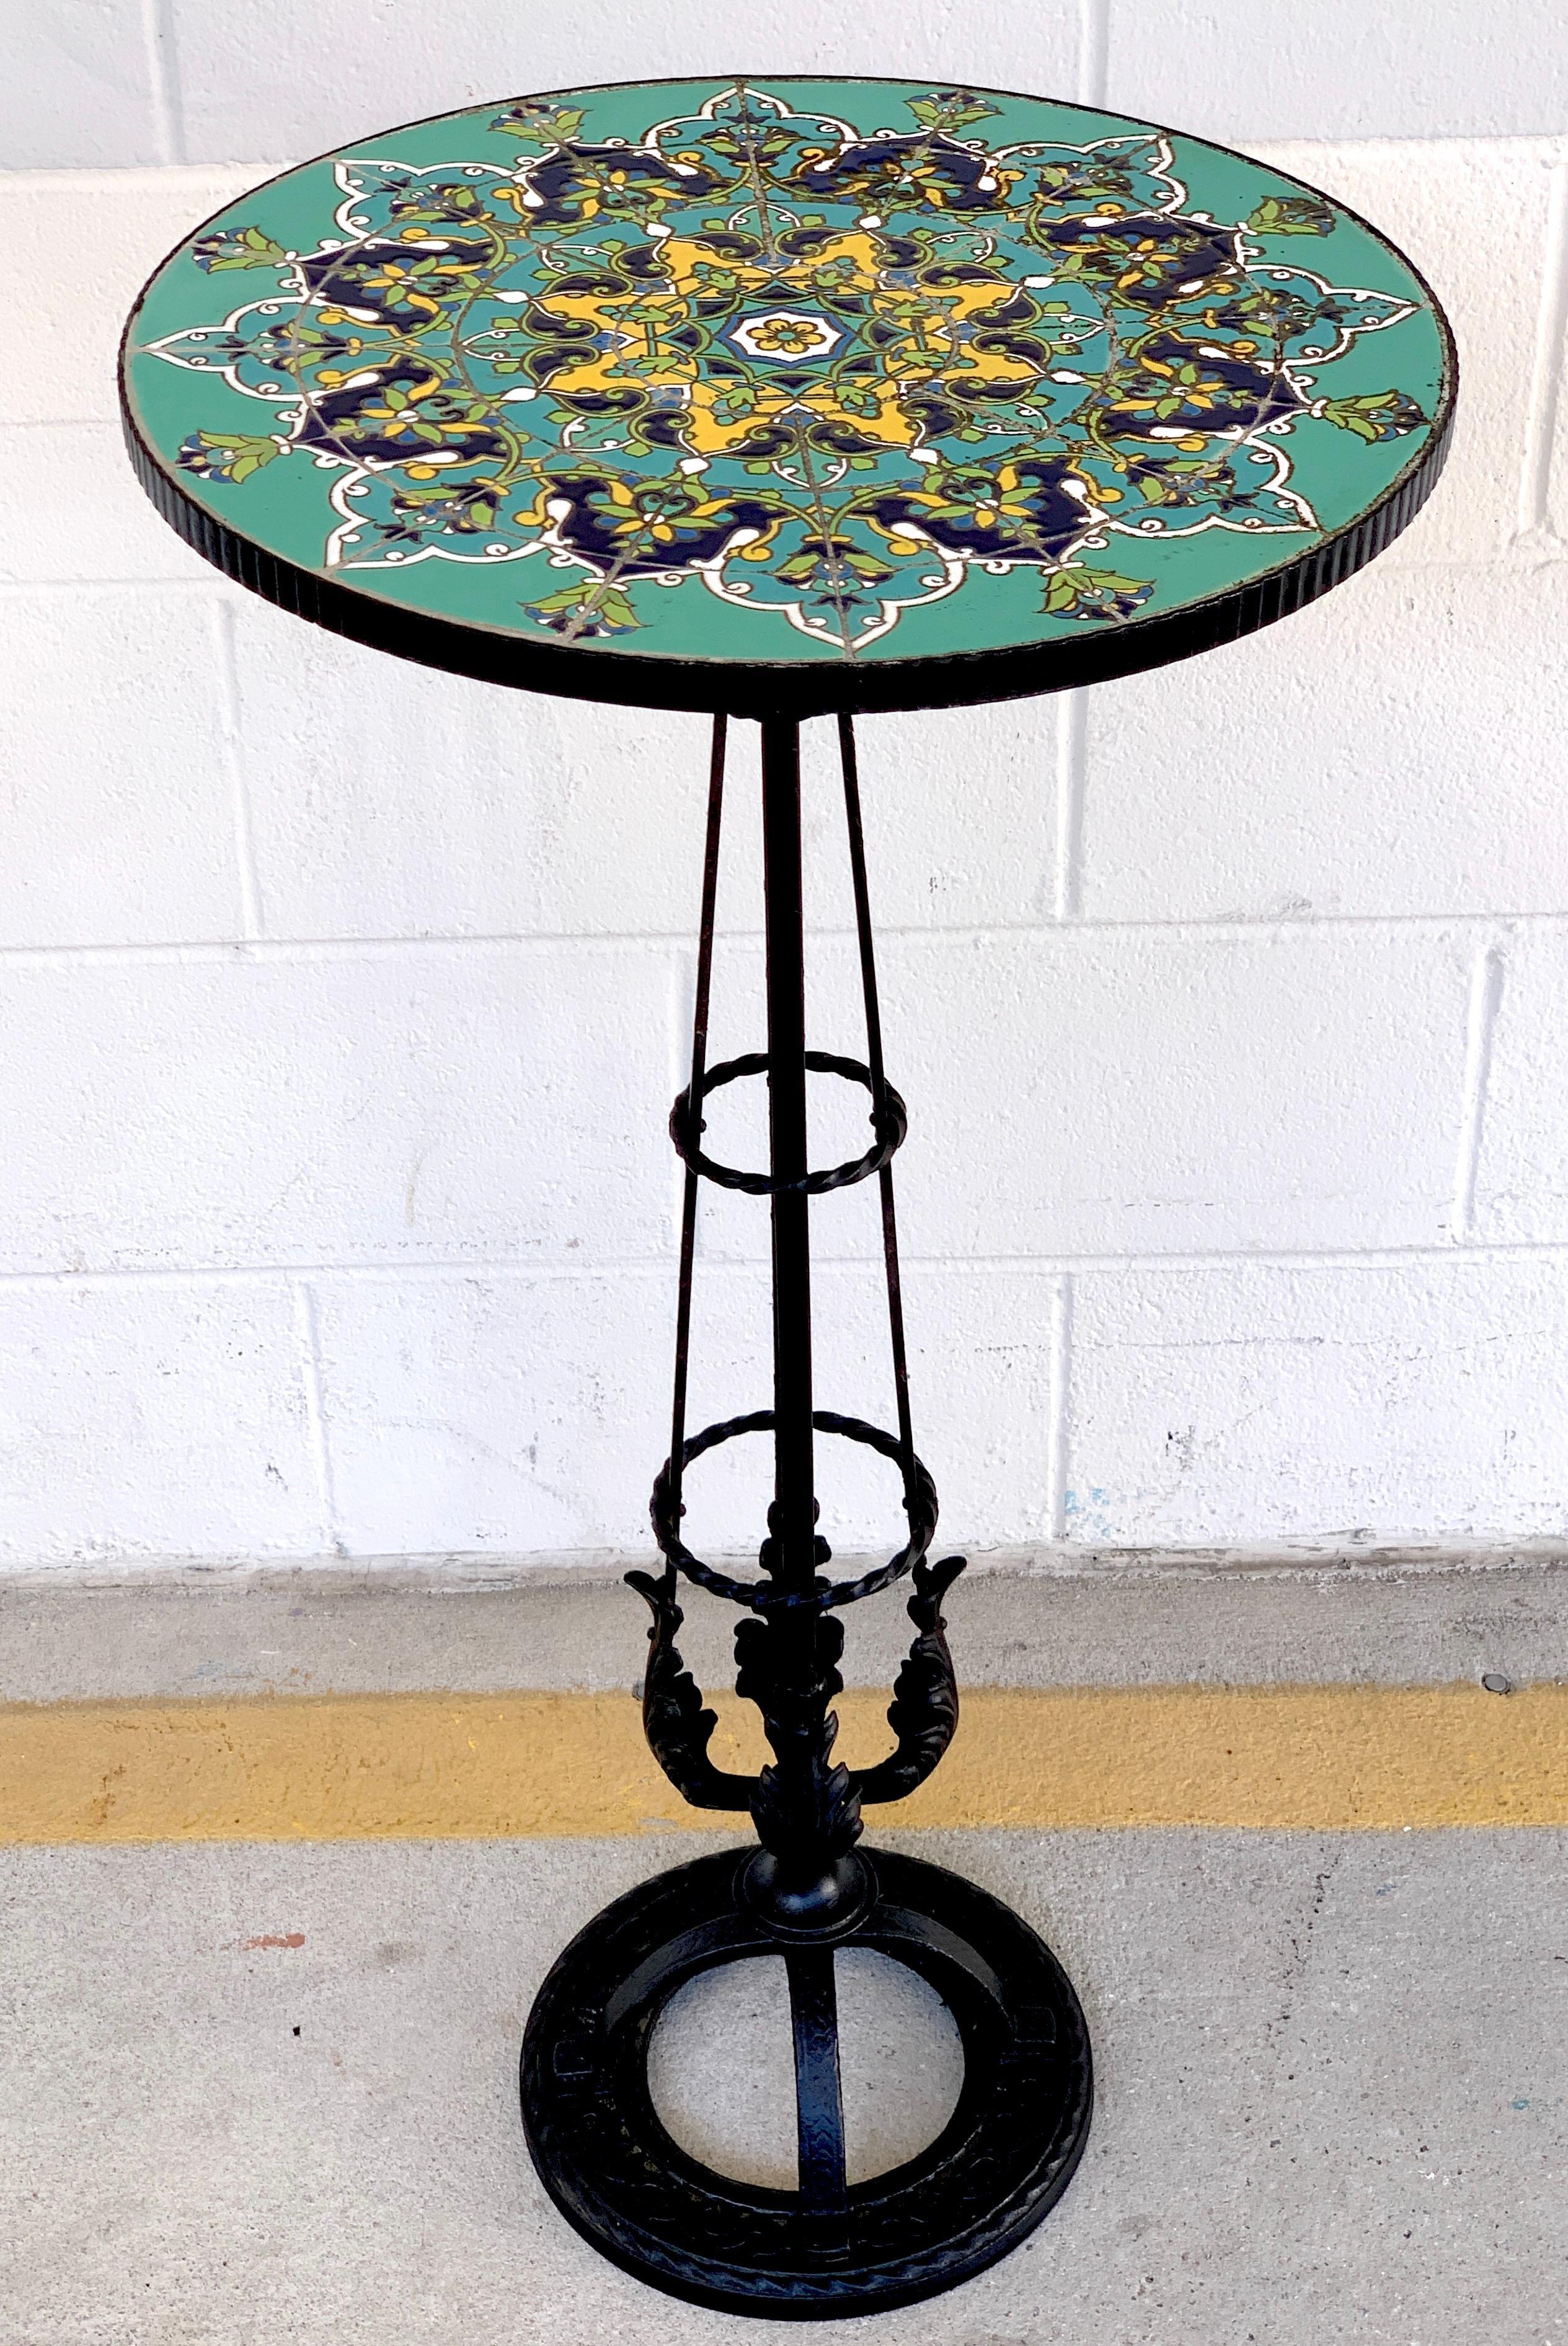 Enameled French Art Deco Turquoise Tile and Wrought Iron Pedestal Table For Sale